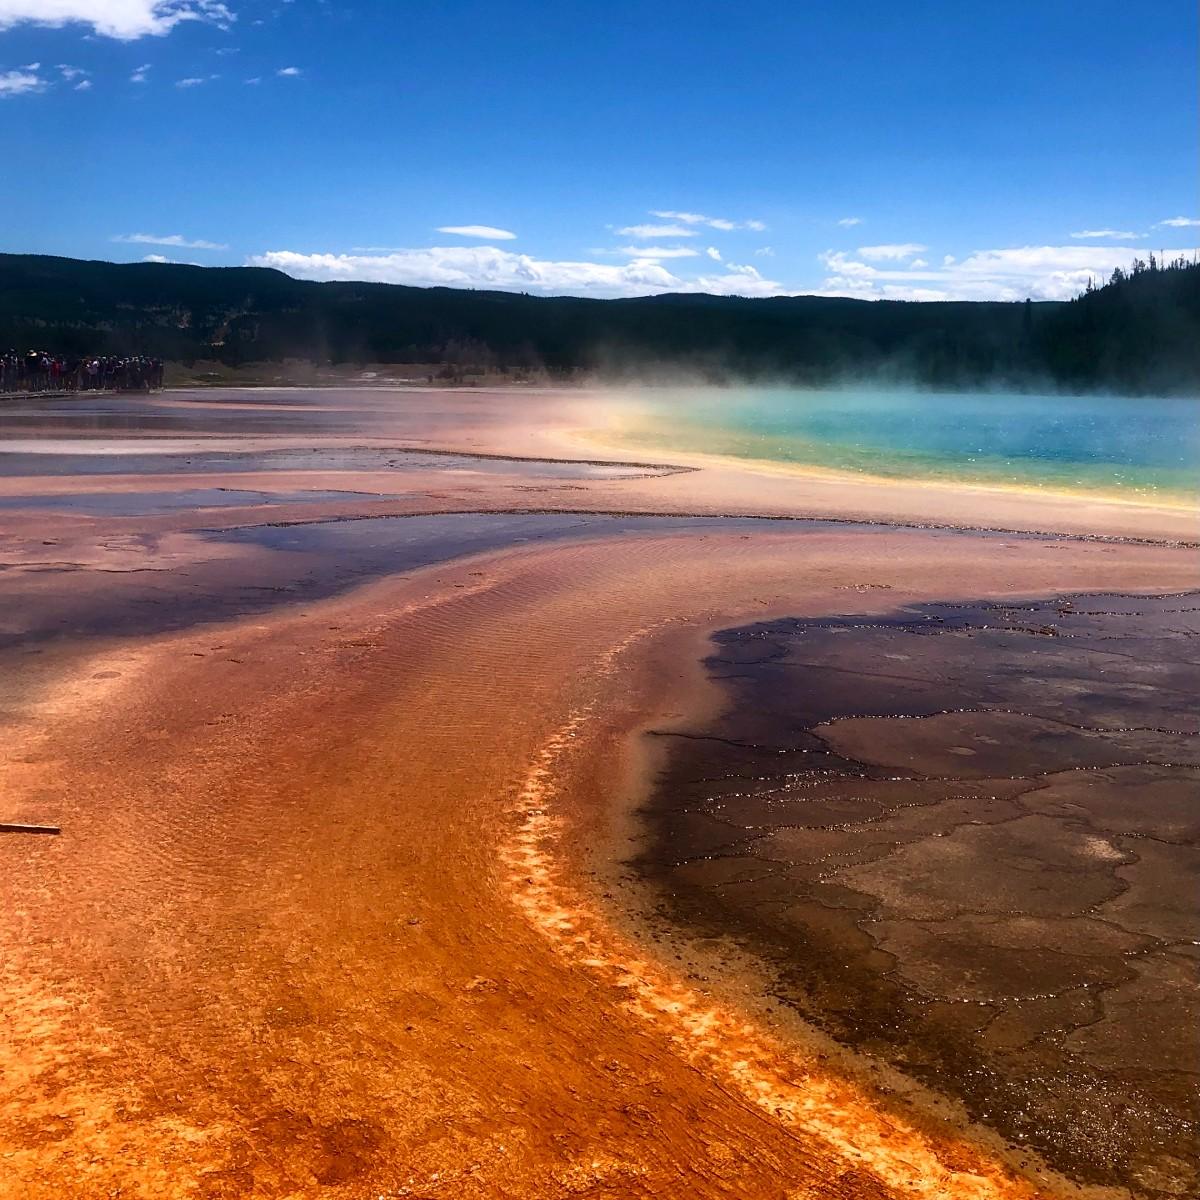 View of the Grand Prismatic Spring at Yellowstone National Park